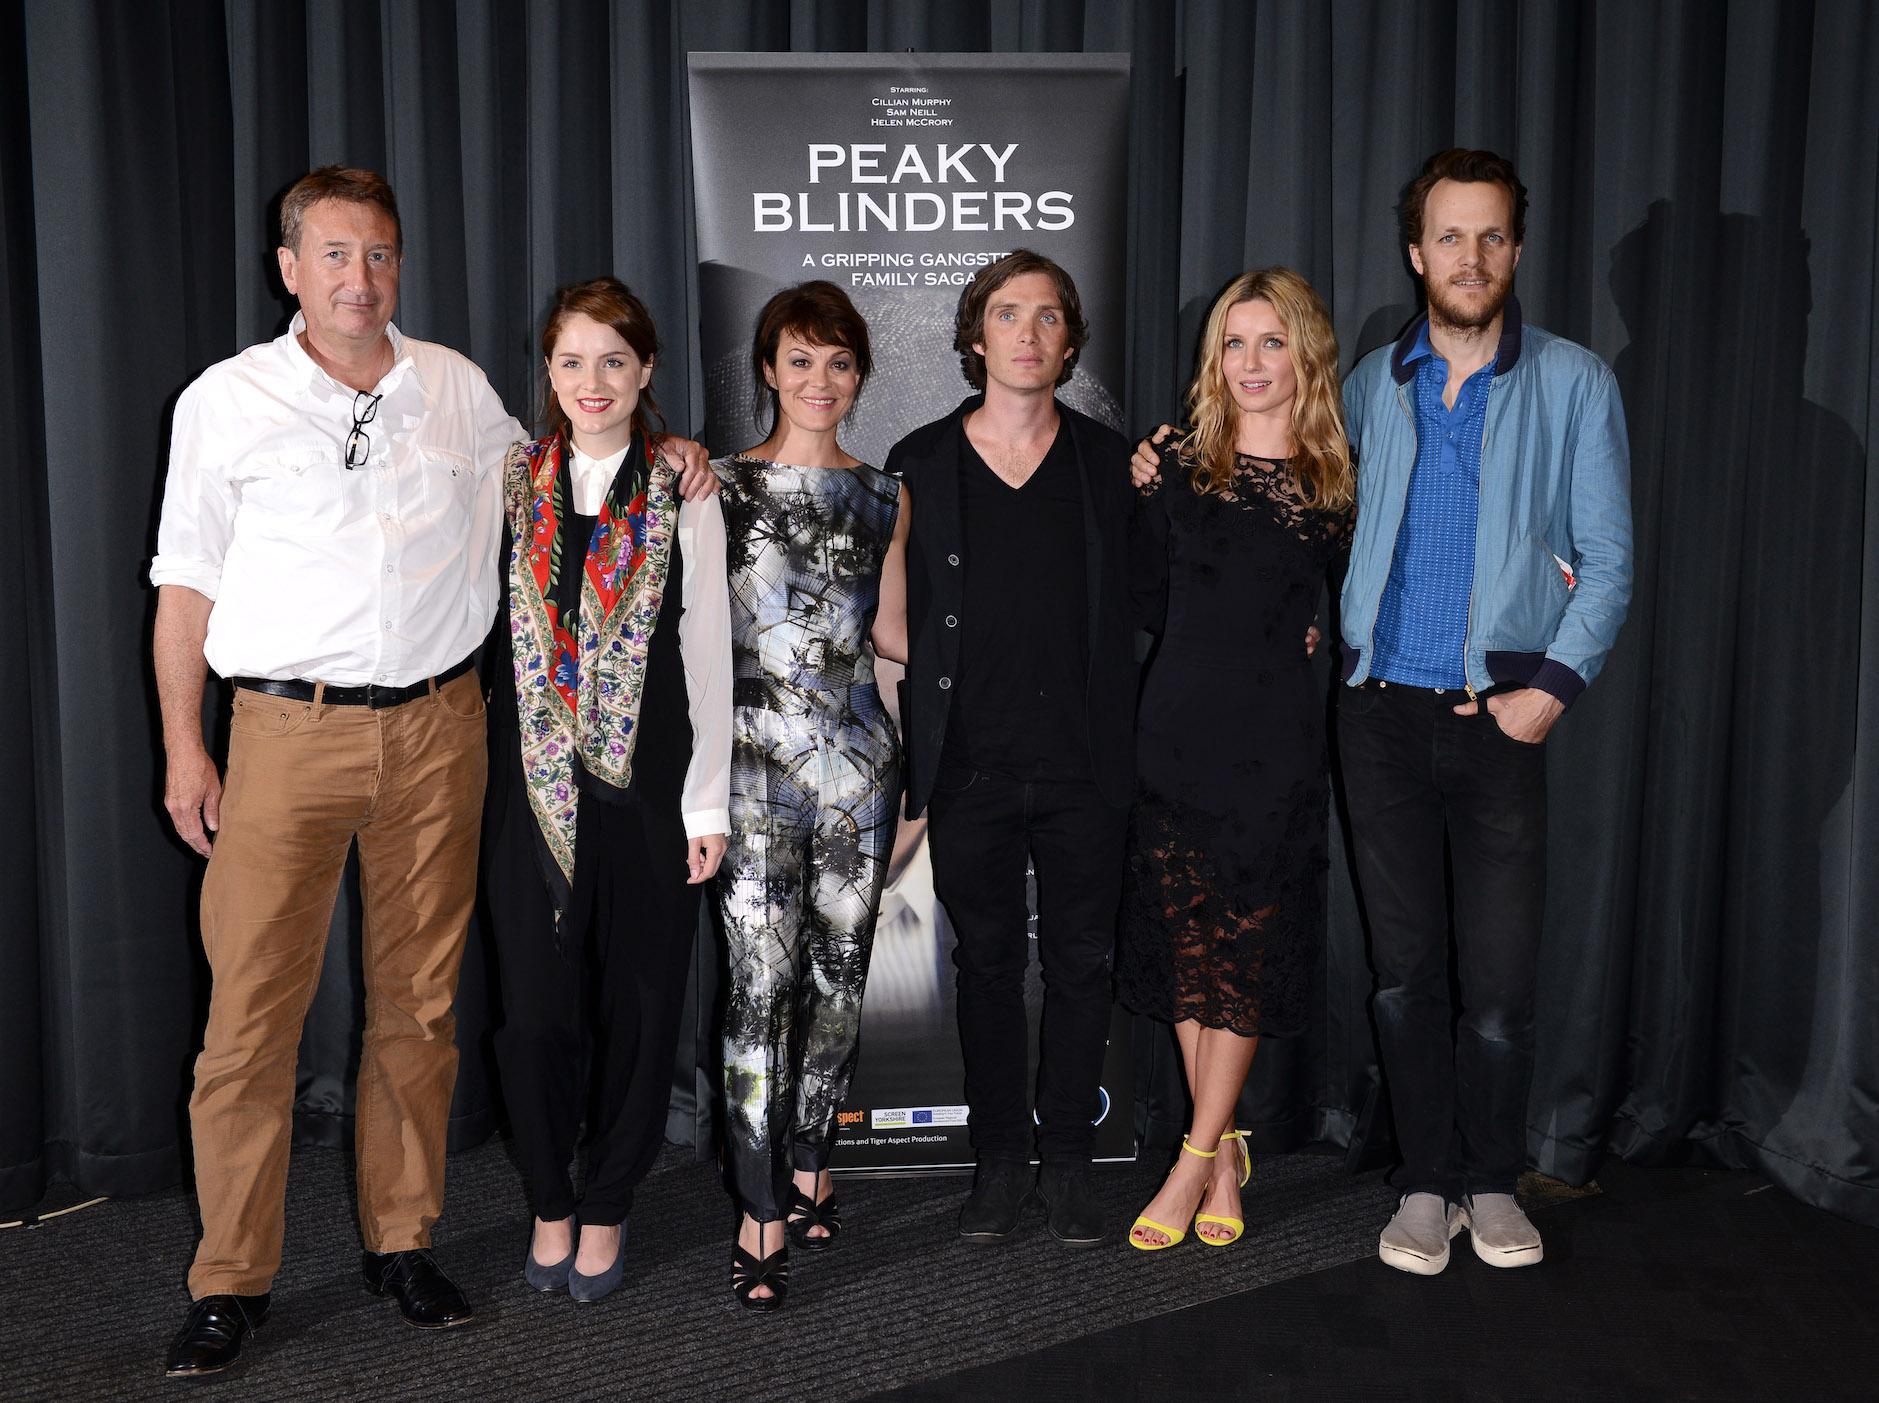 Actors soon to be on 'Peaky Blinders' Season 6, like Cillian Murphy and Sophie Rundle, as well as writer Steven Knight, Helen McCrory, Annabelle Wallis, and director Otto Bathurst standing together at a 'Peaky Blinders' screening